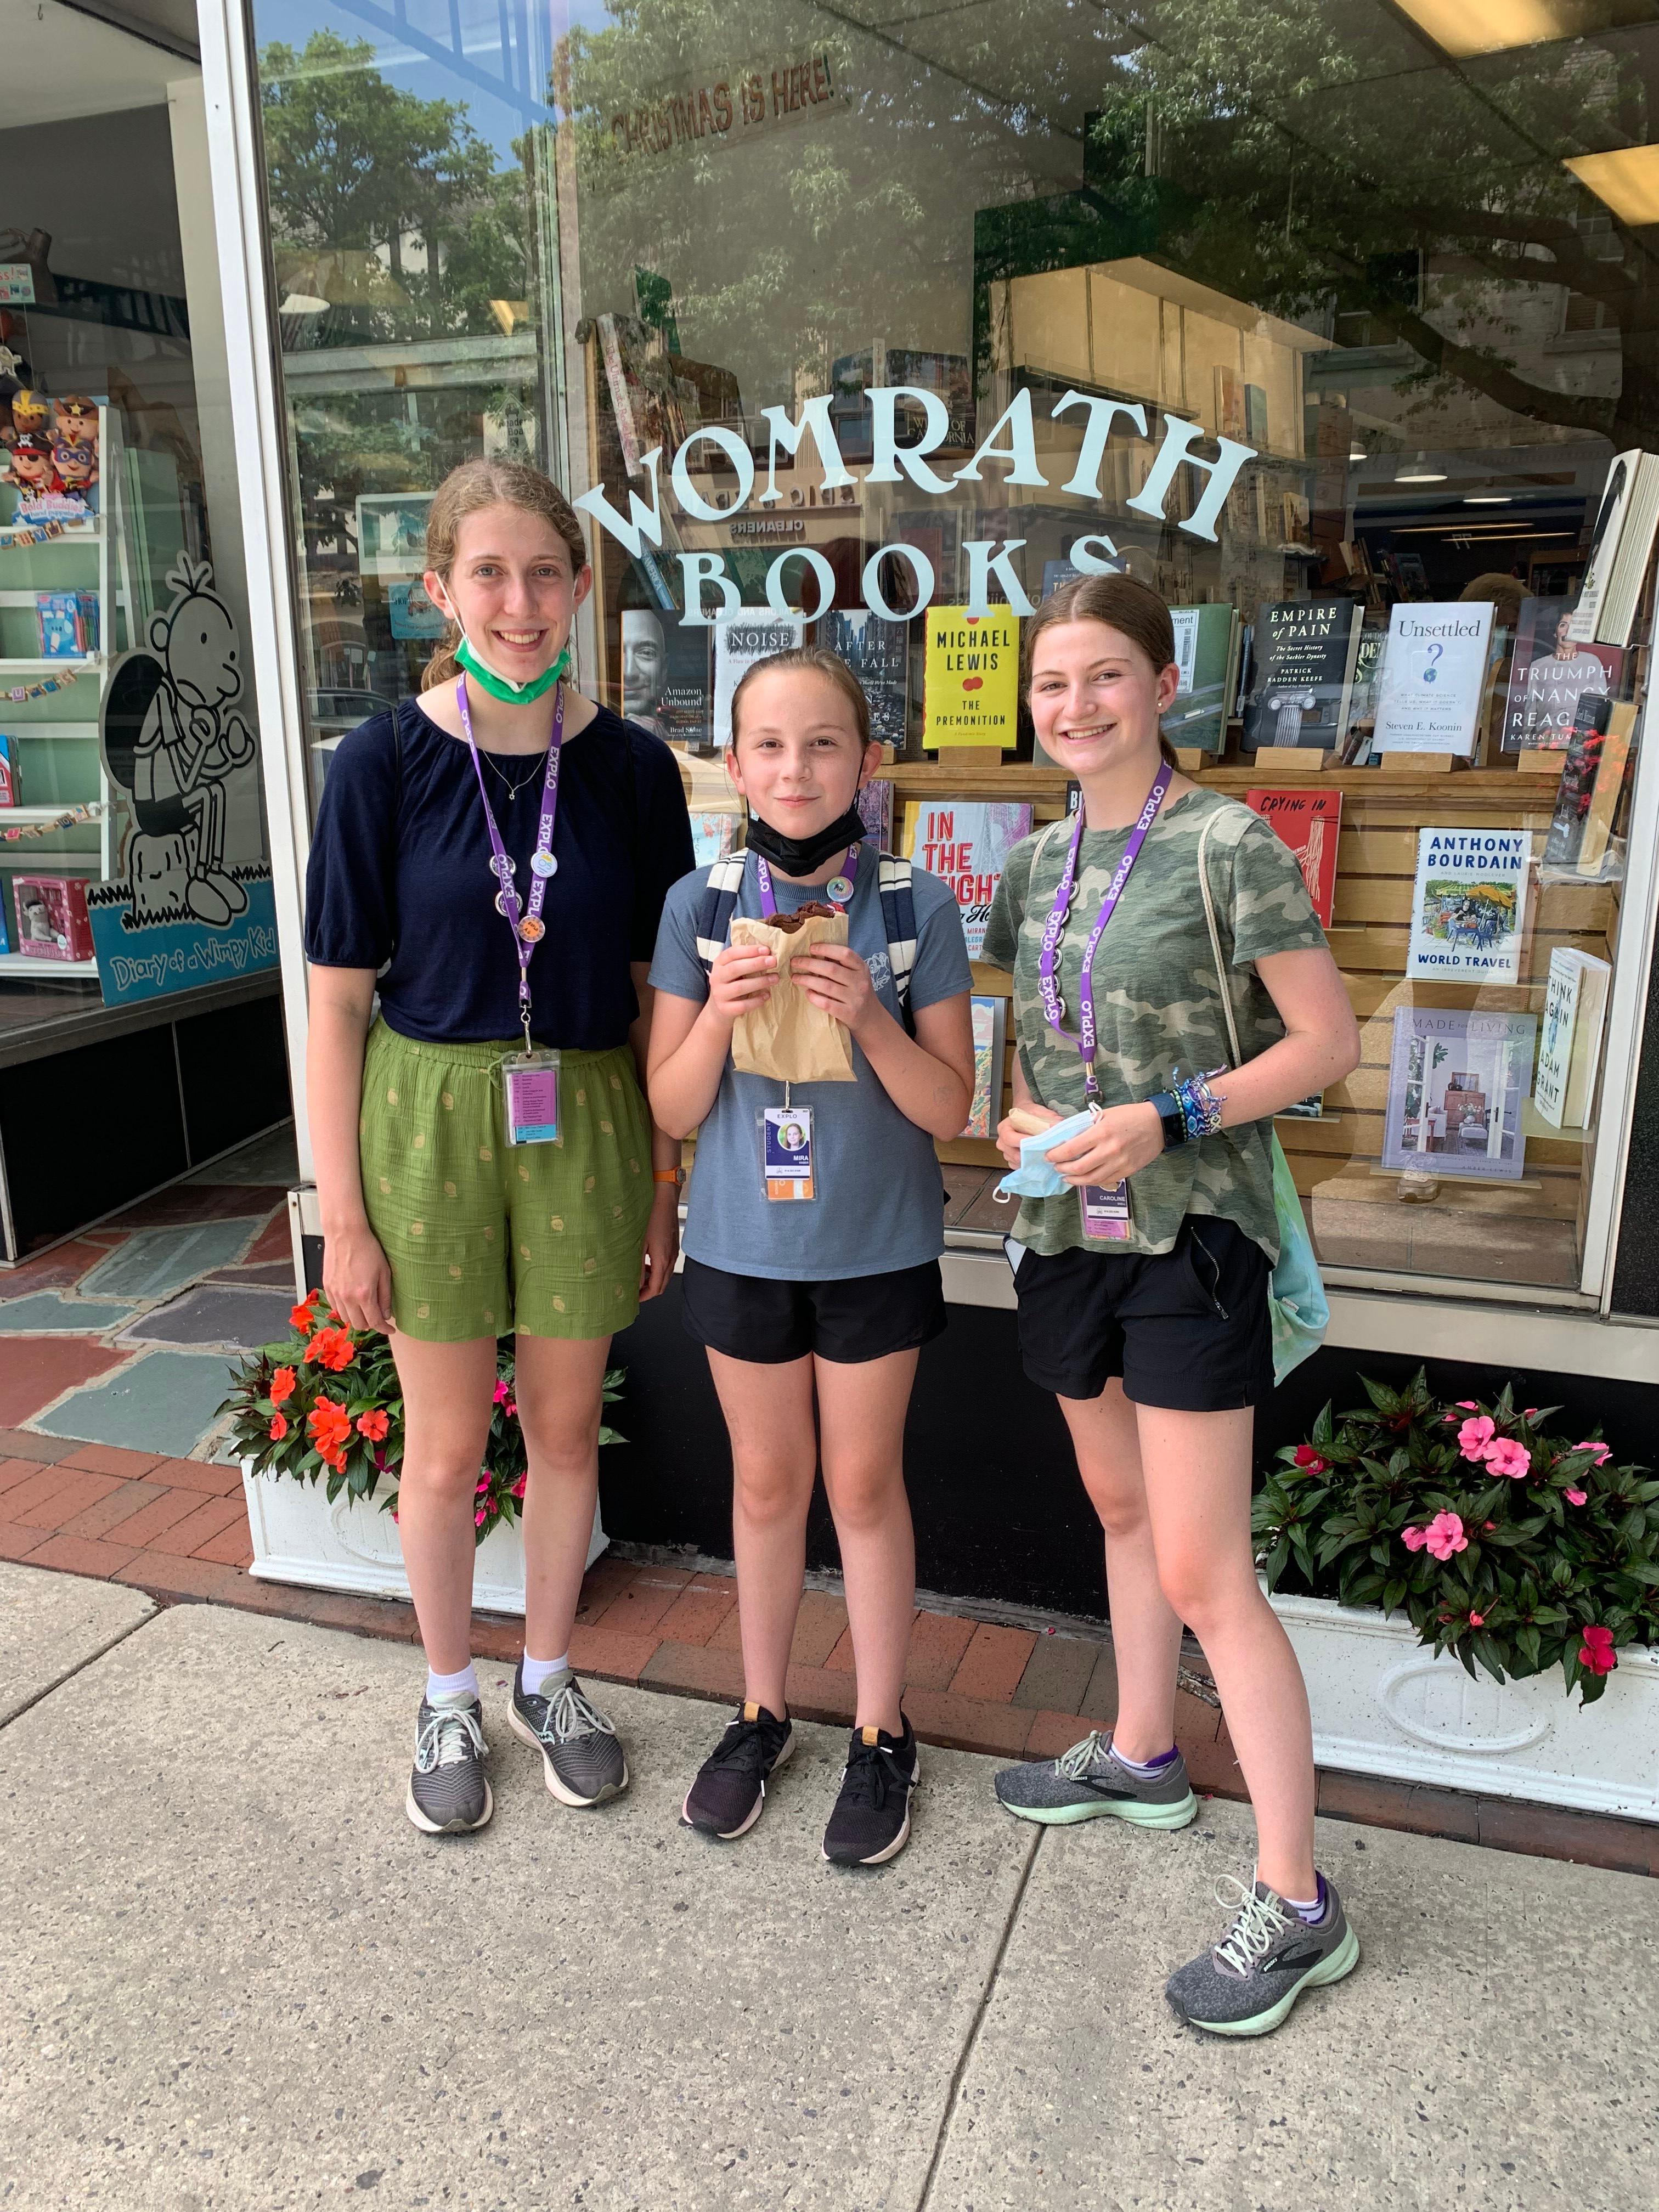 Three female EXPLO students stand in front of Womrath Books, a book shop in Bronxville, NY.